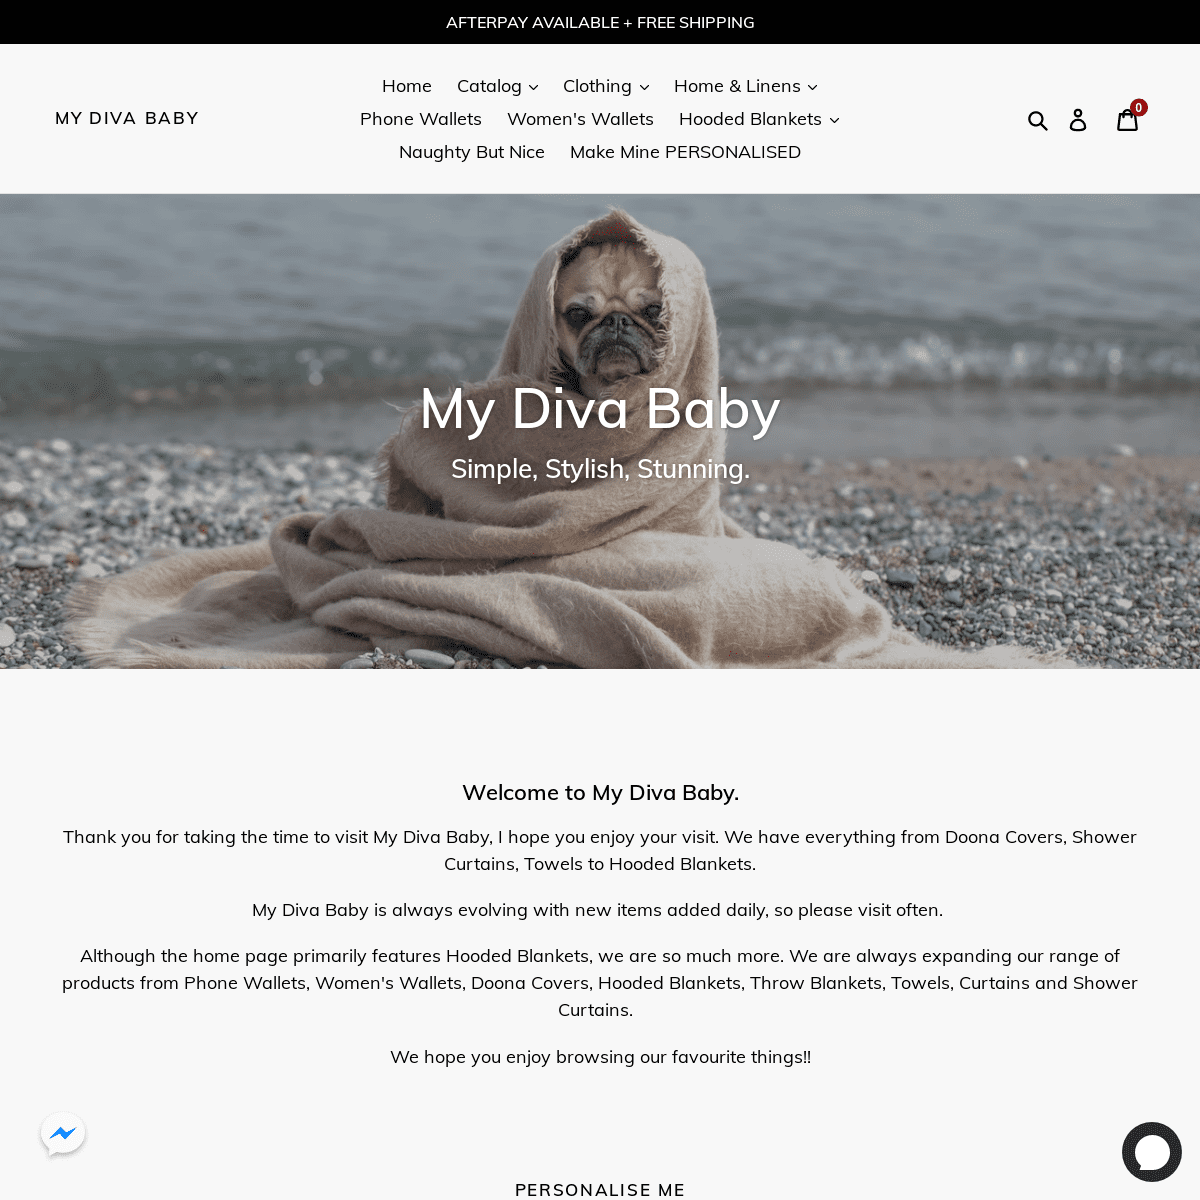 A complete backup of mydivababy.com.au